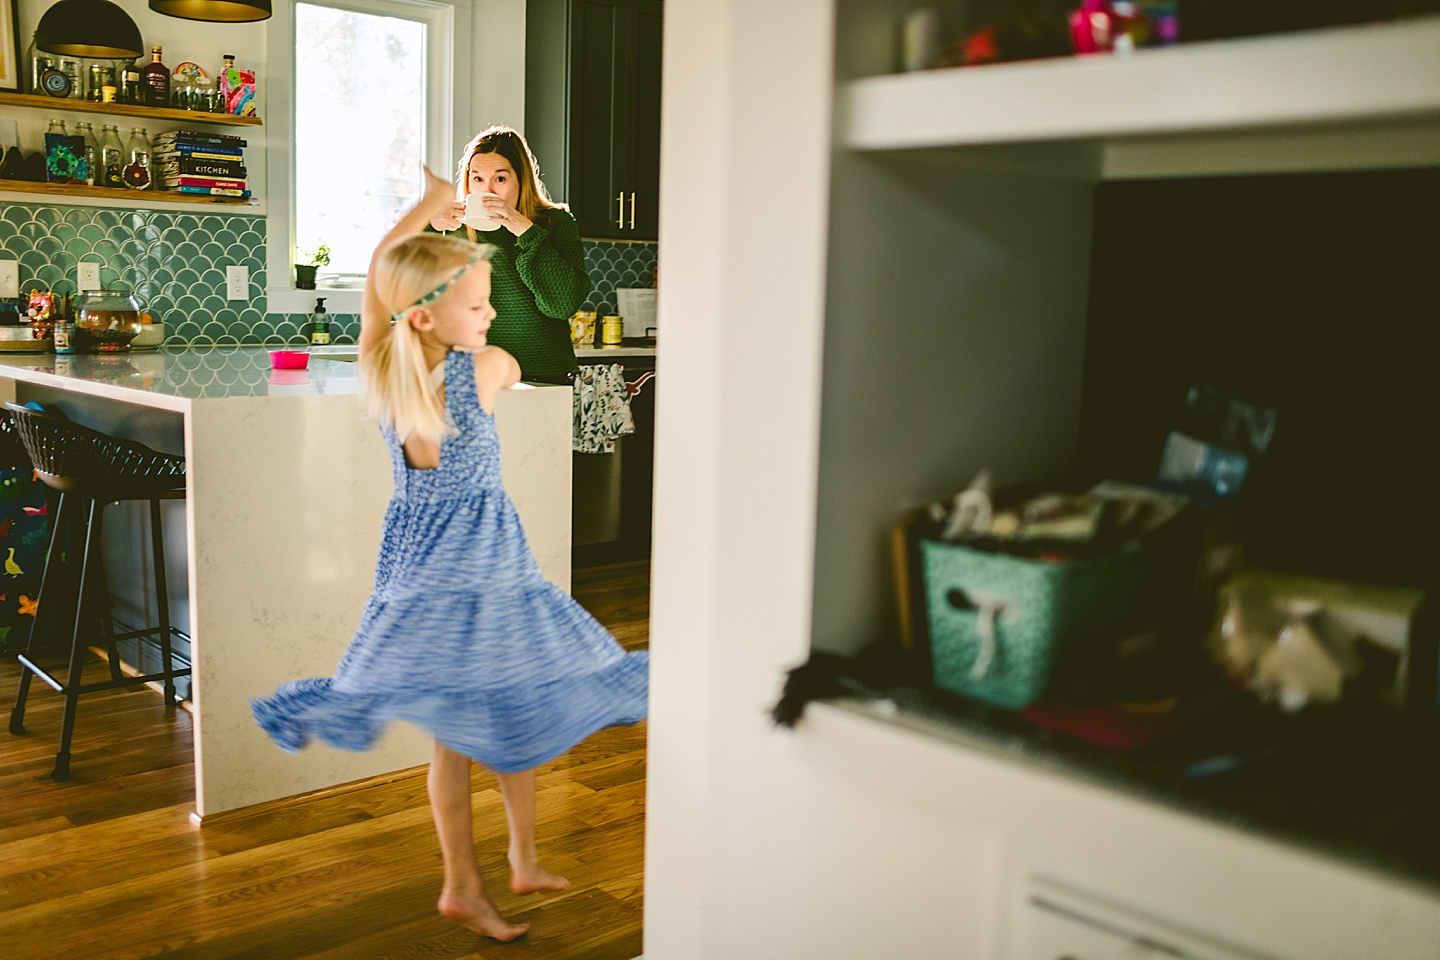 Girl twirling in the kitchen